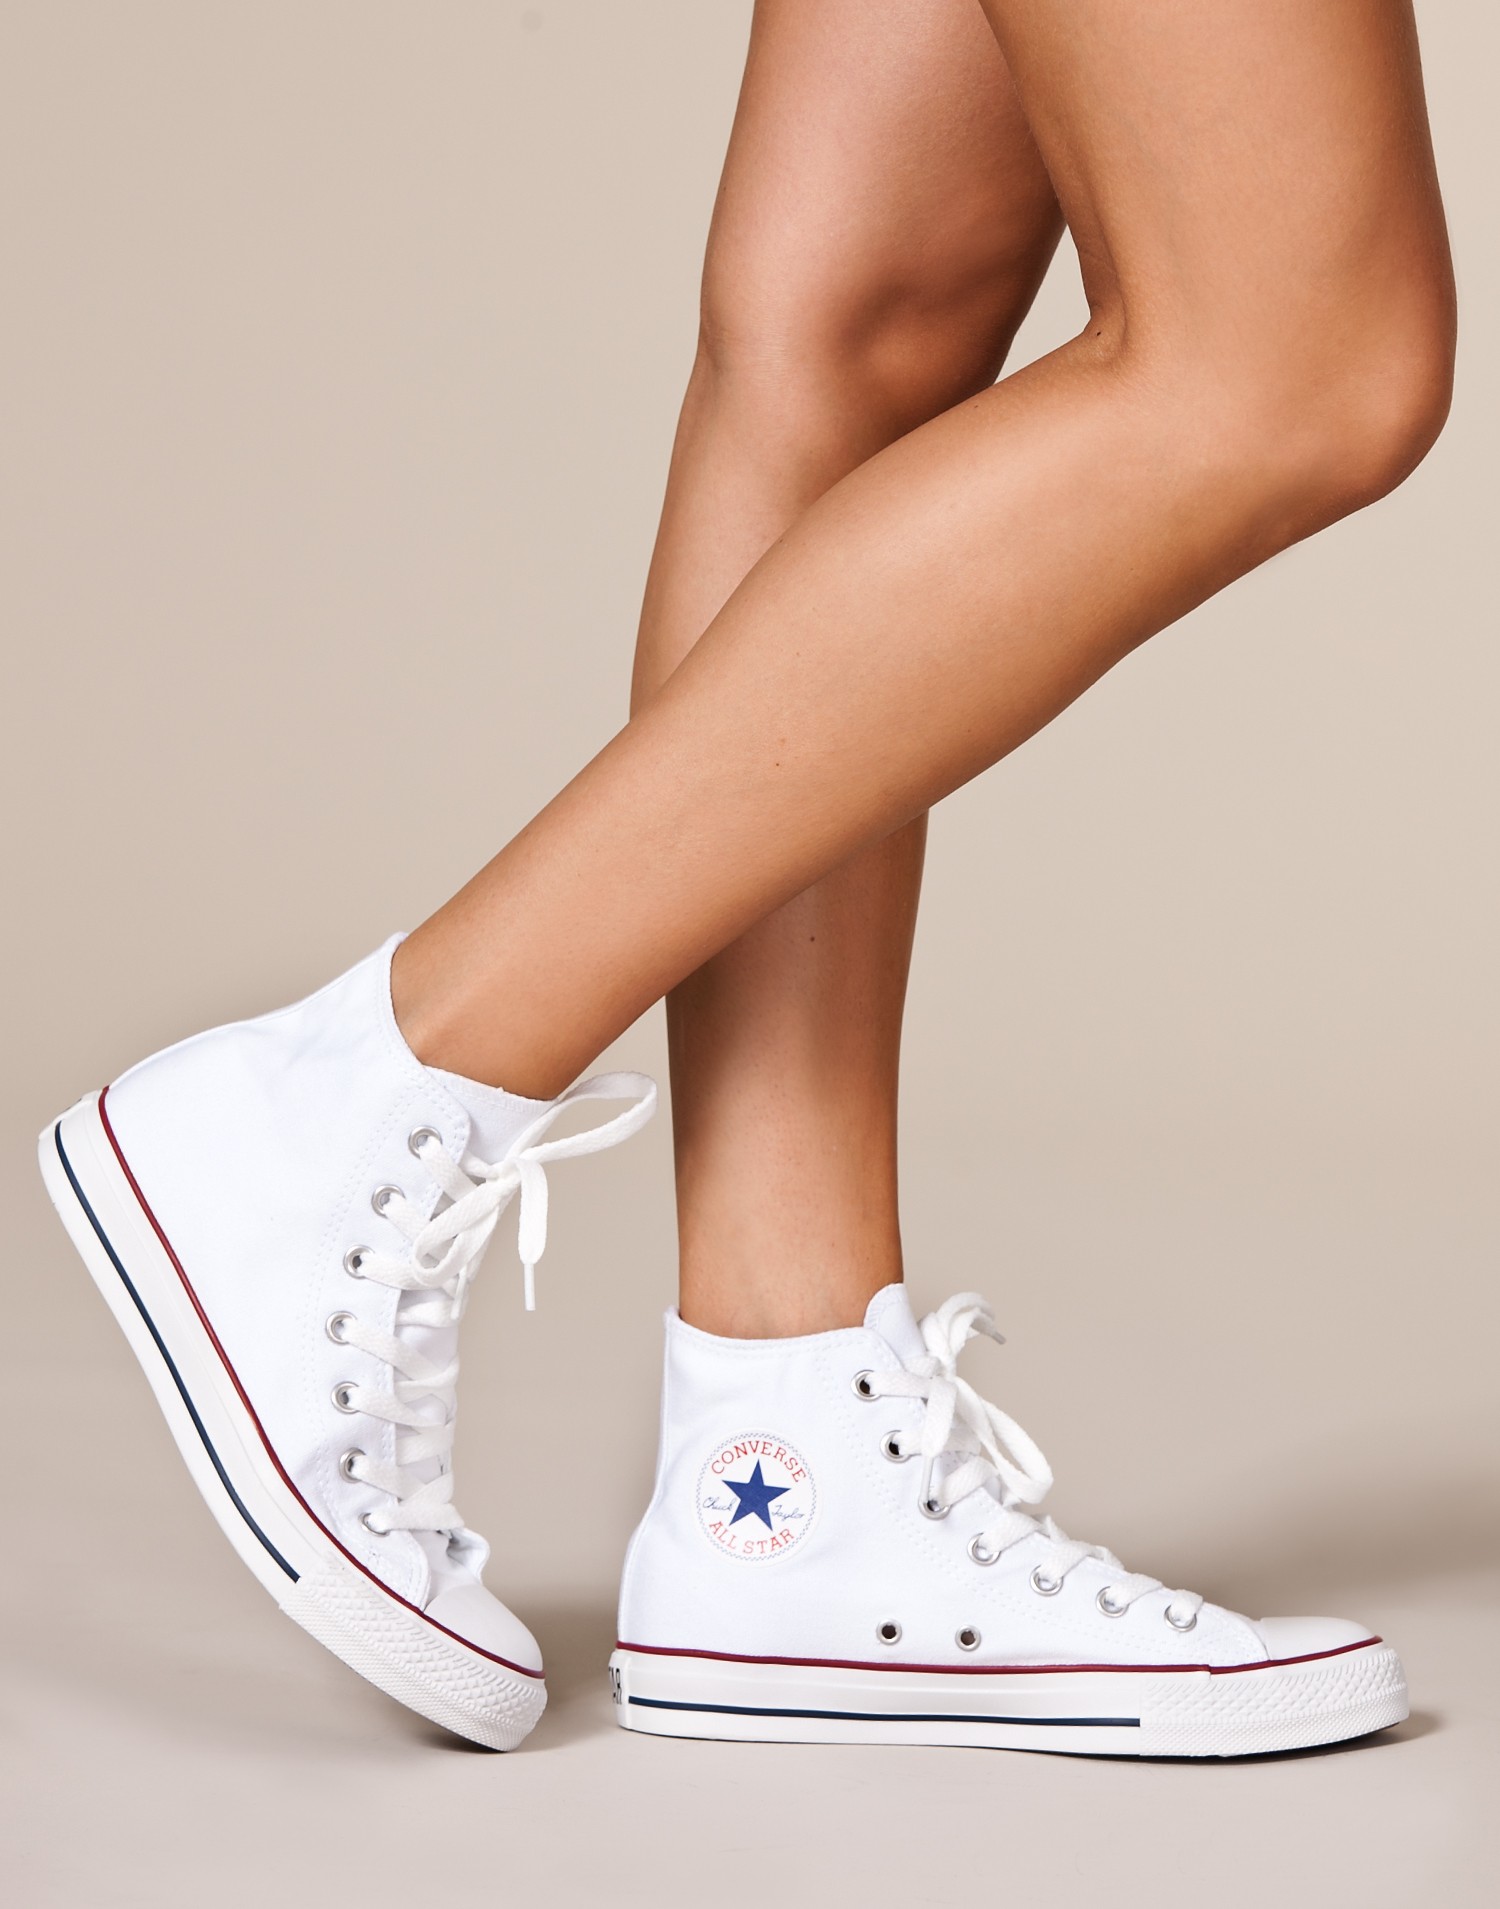 You can't go wrong this season with these classic high top trainers by...